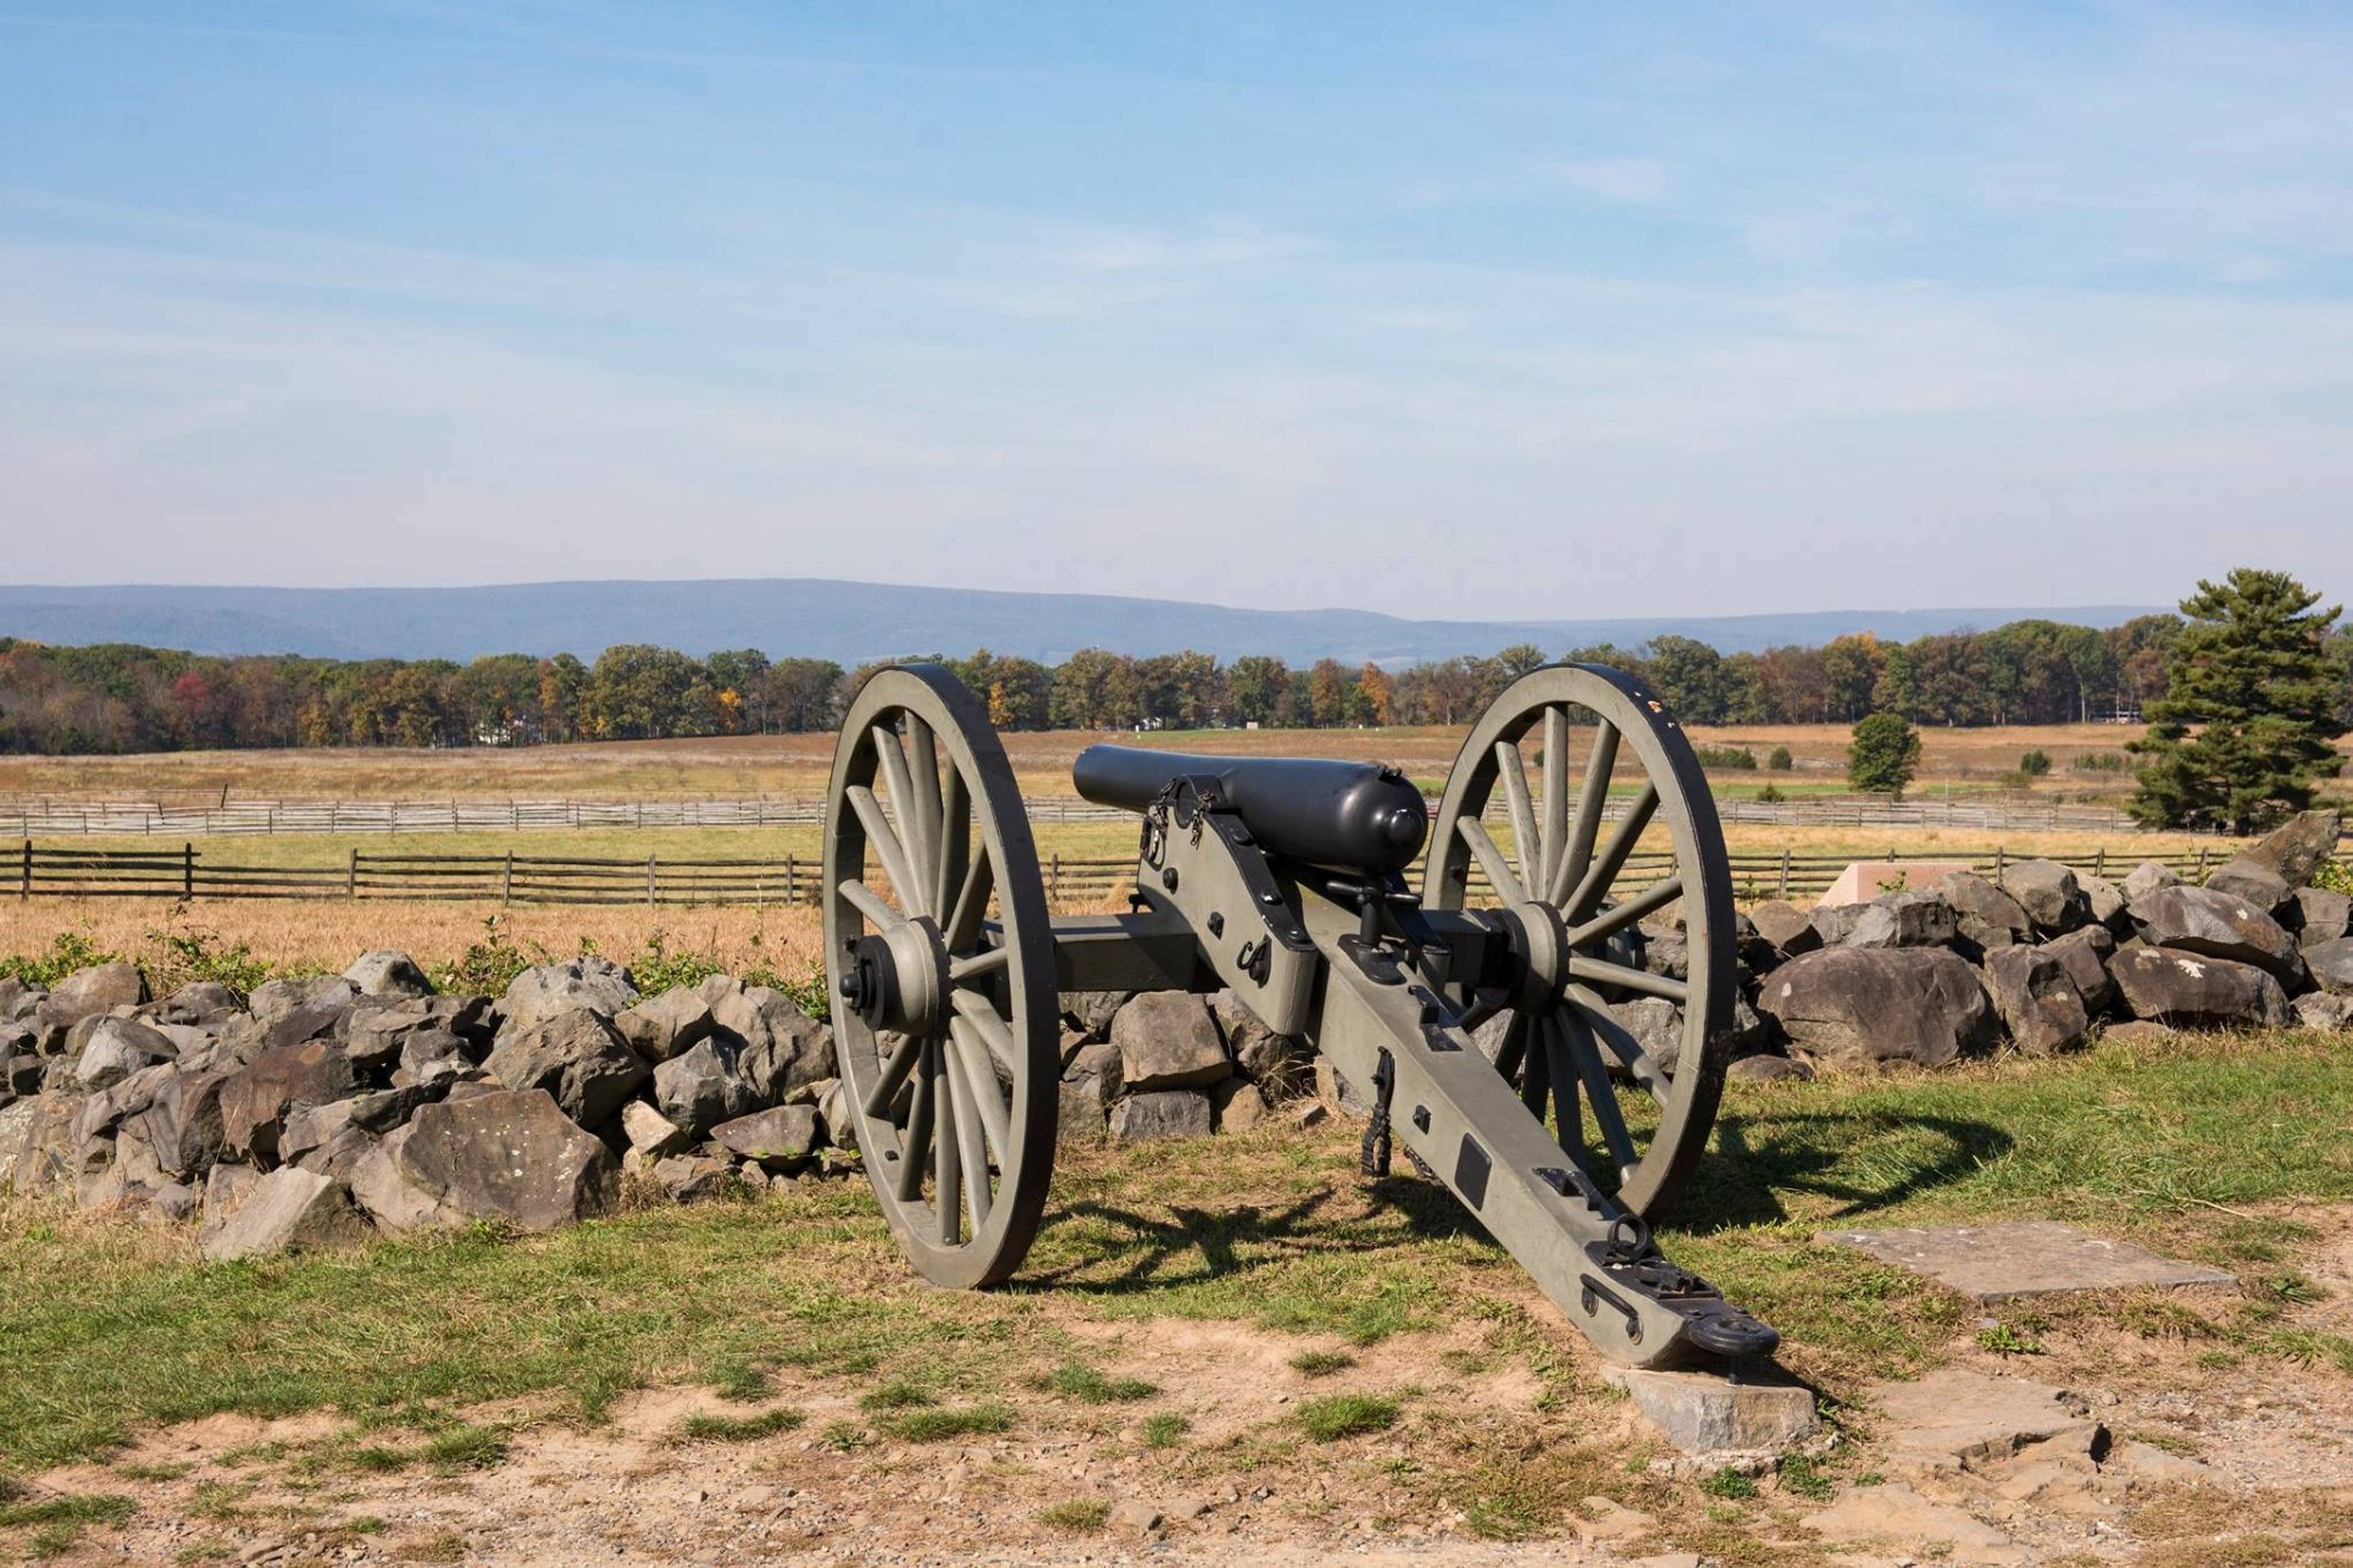 Memories of the Civil War and the Appalachian Mountains